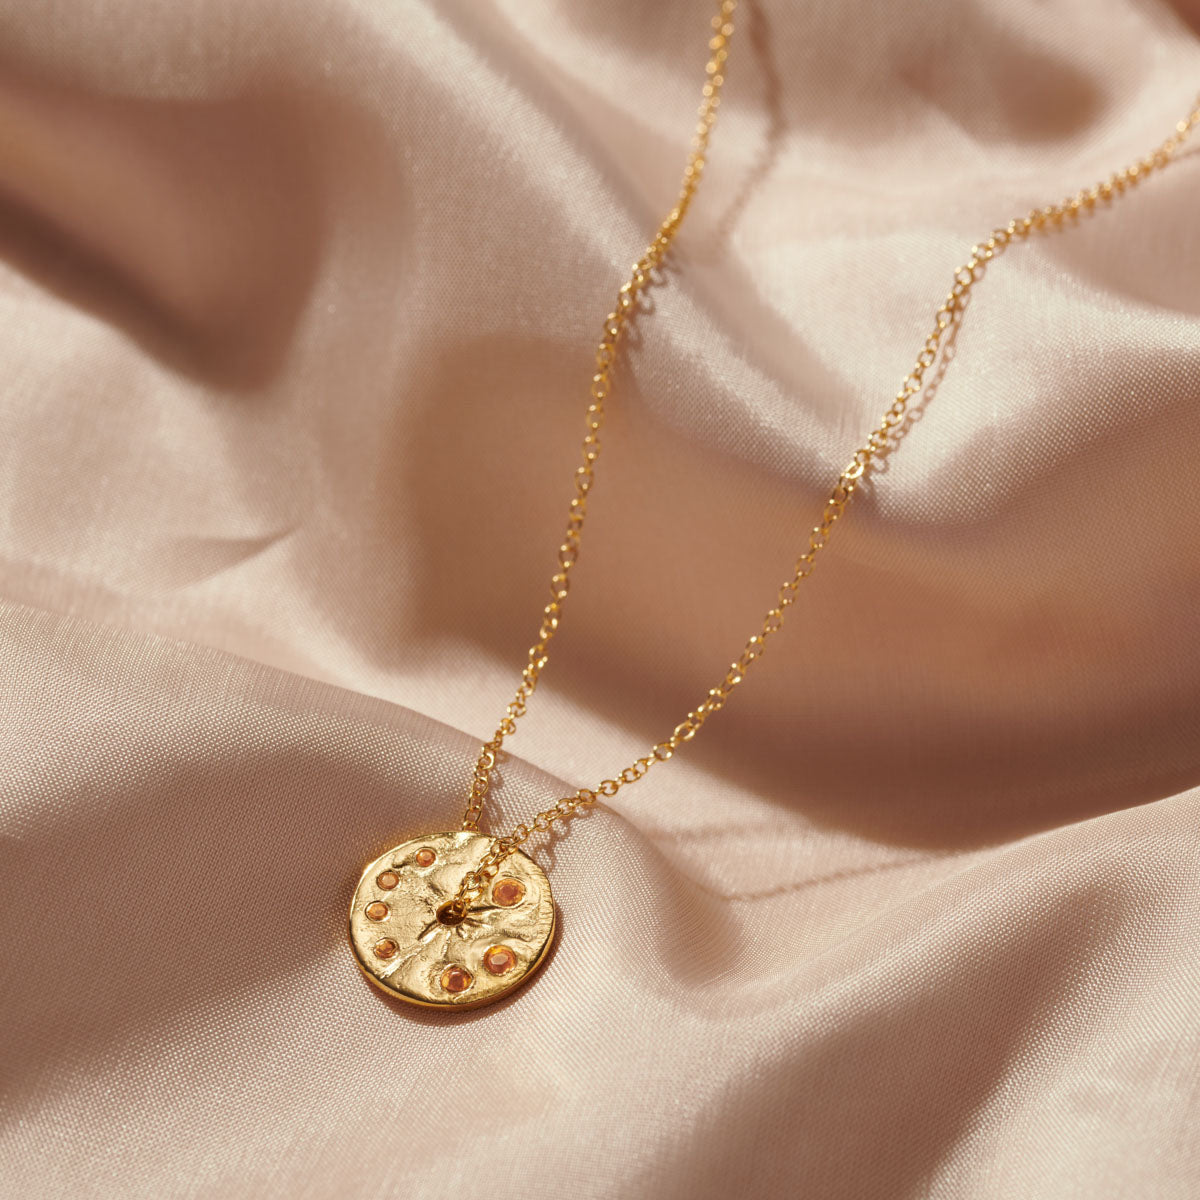 Gold disc pendant with set cirone gemstones for a November birthday gift.